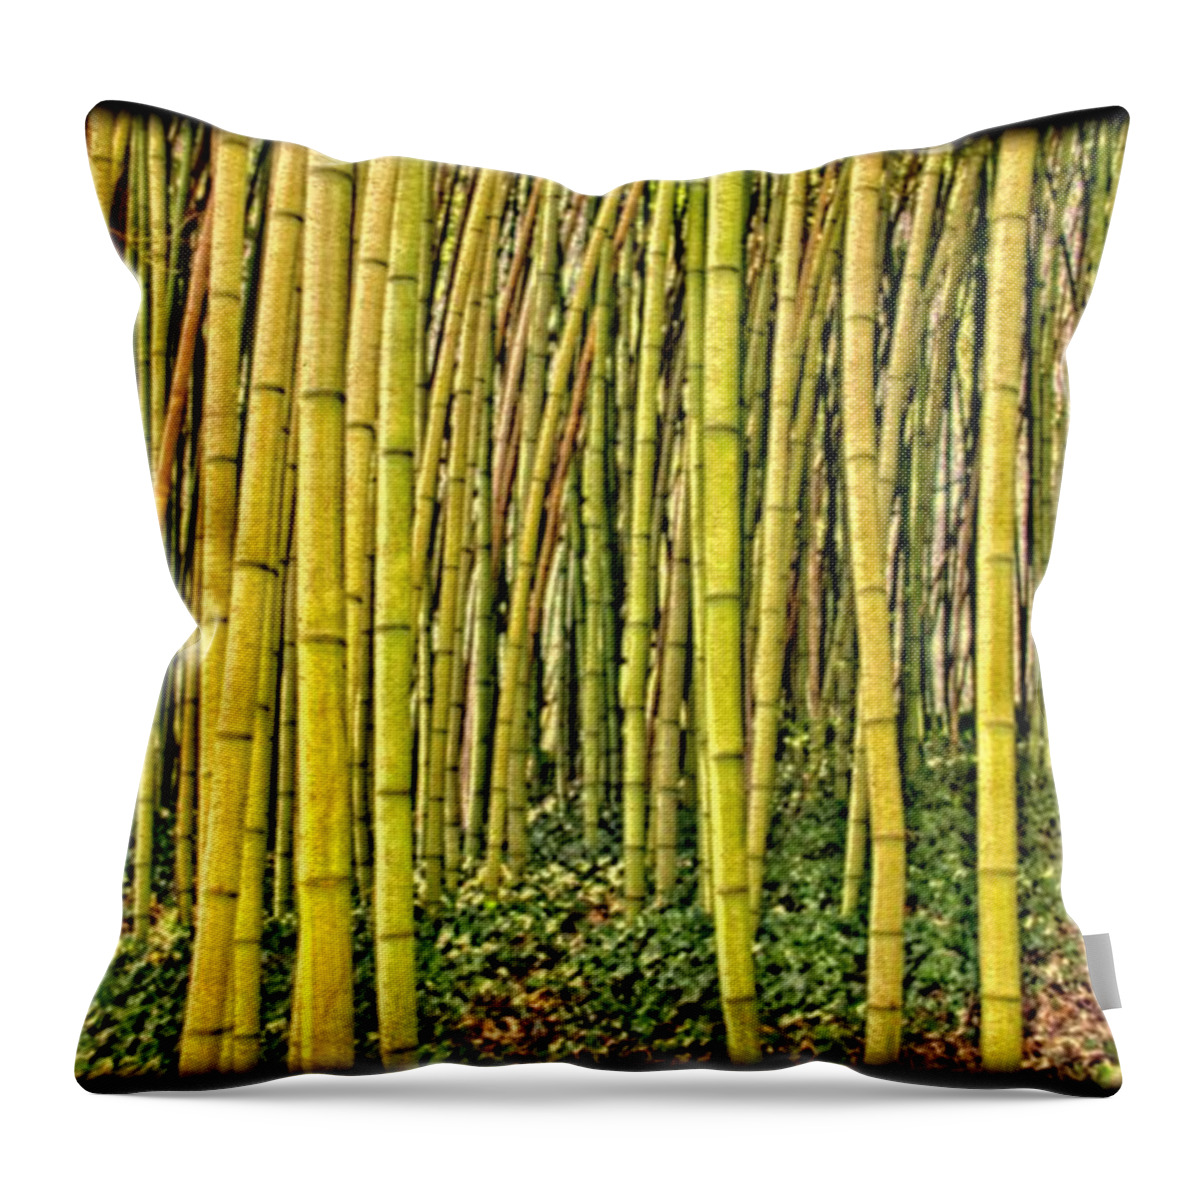 Bamboo Throw Pillow featuring the photograph Bamboo by Allen Nice-Webb